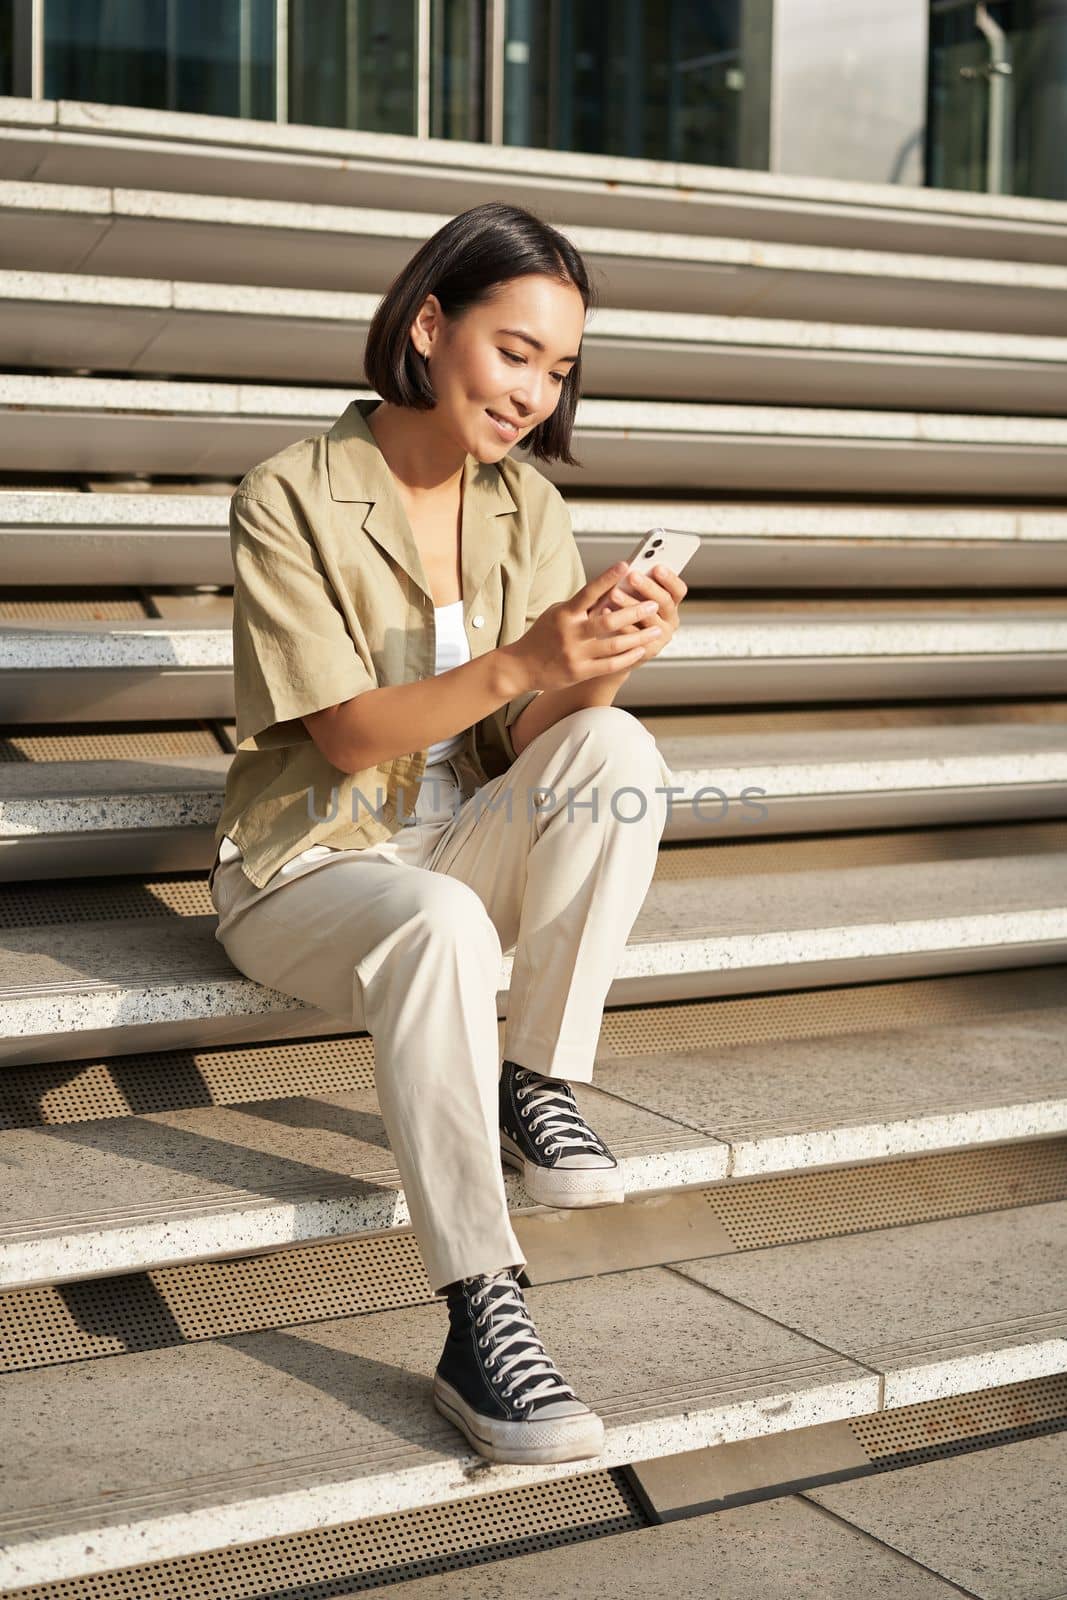 Beautiful asian girl sitting on stairs outside building, using mobile phone, looking at smartphone app and smiling.